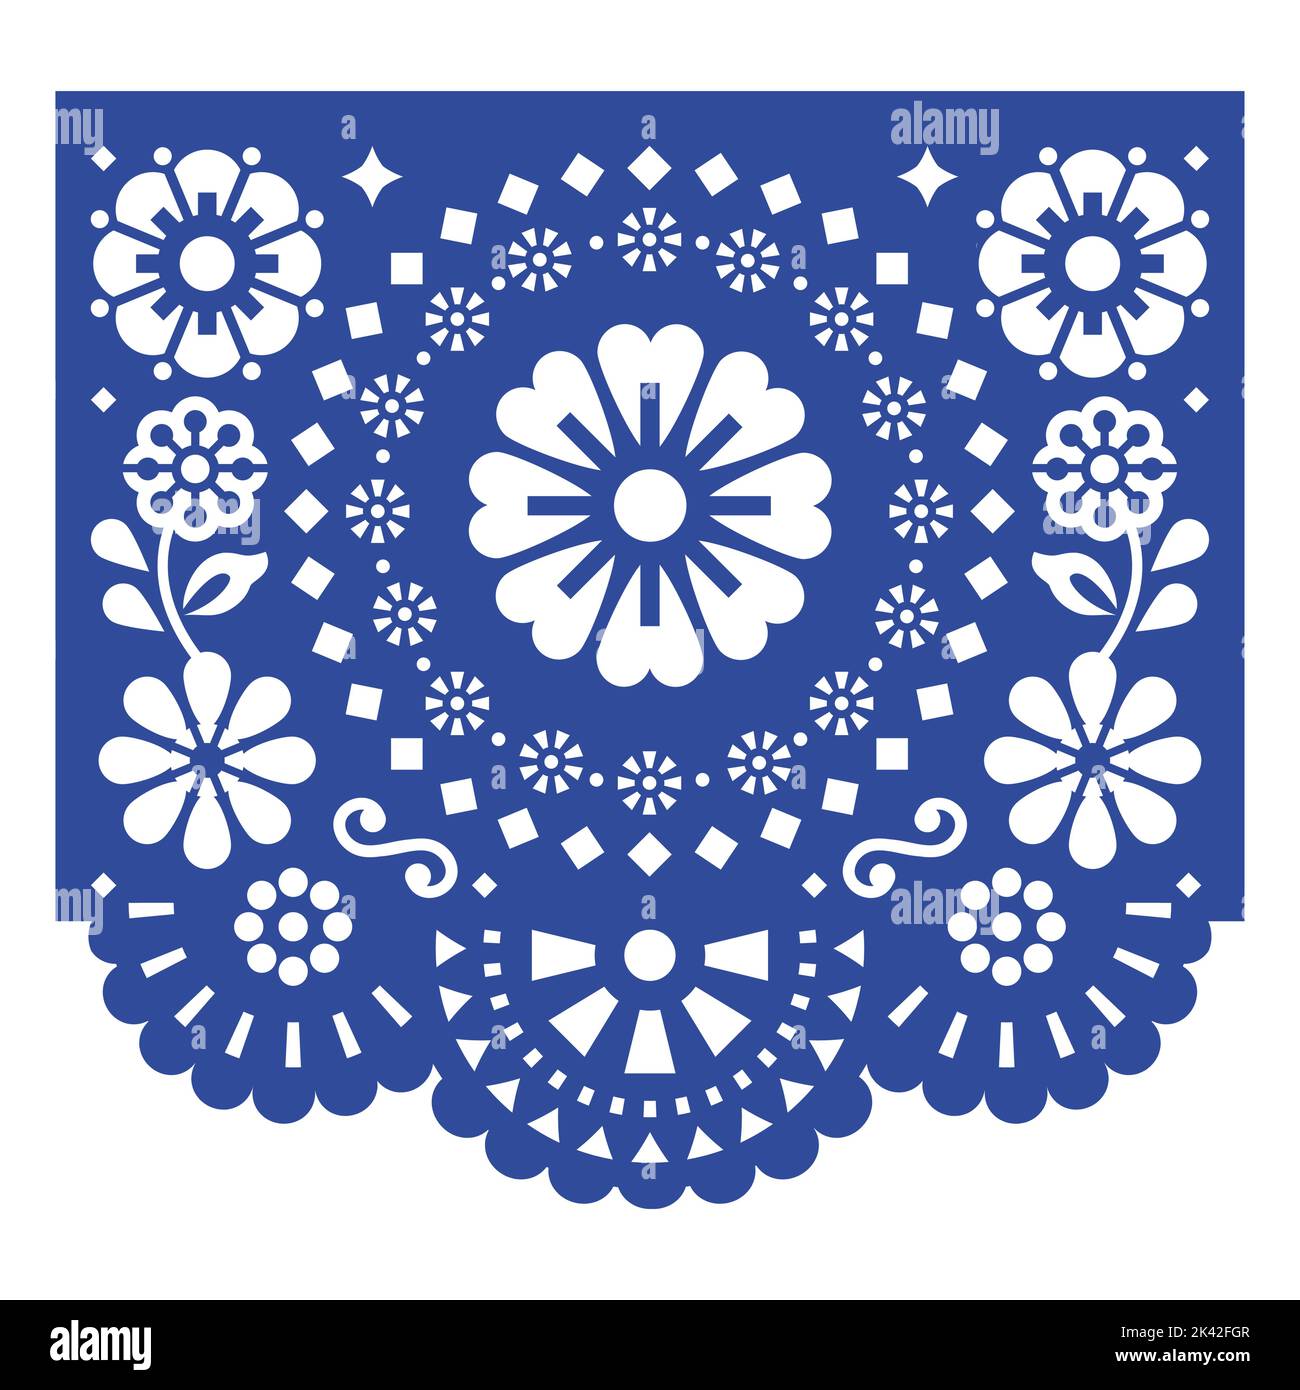 Party decoration Papel Picado vector design, retro Mexican fiesta paper cutout background with flowers and leaves Stock Vector